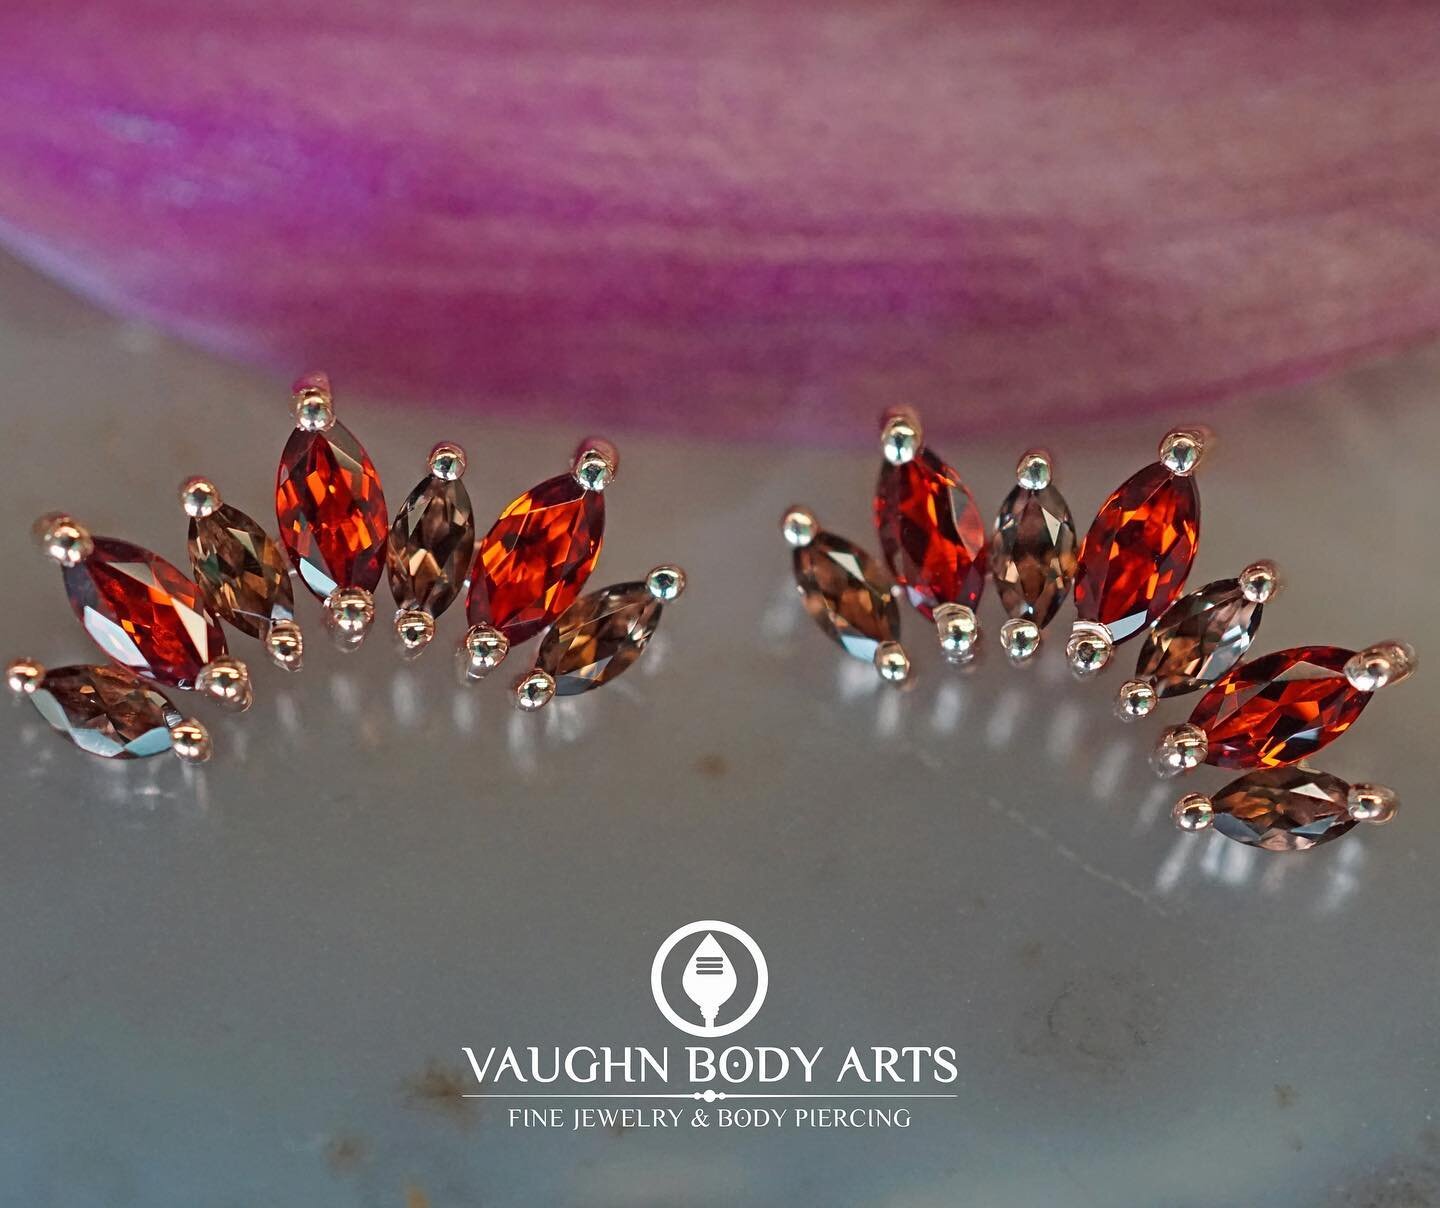 Some new BVLA jewelry just hit the display cases!

These &ldquo;Athena&rdquo; threaded ends are simply stunning. They&rsquo;re made of solid Rose Gold with Genuine Garnets and Smokey Quartz. 

These and so many other new pieces are in stock now!

#va